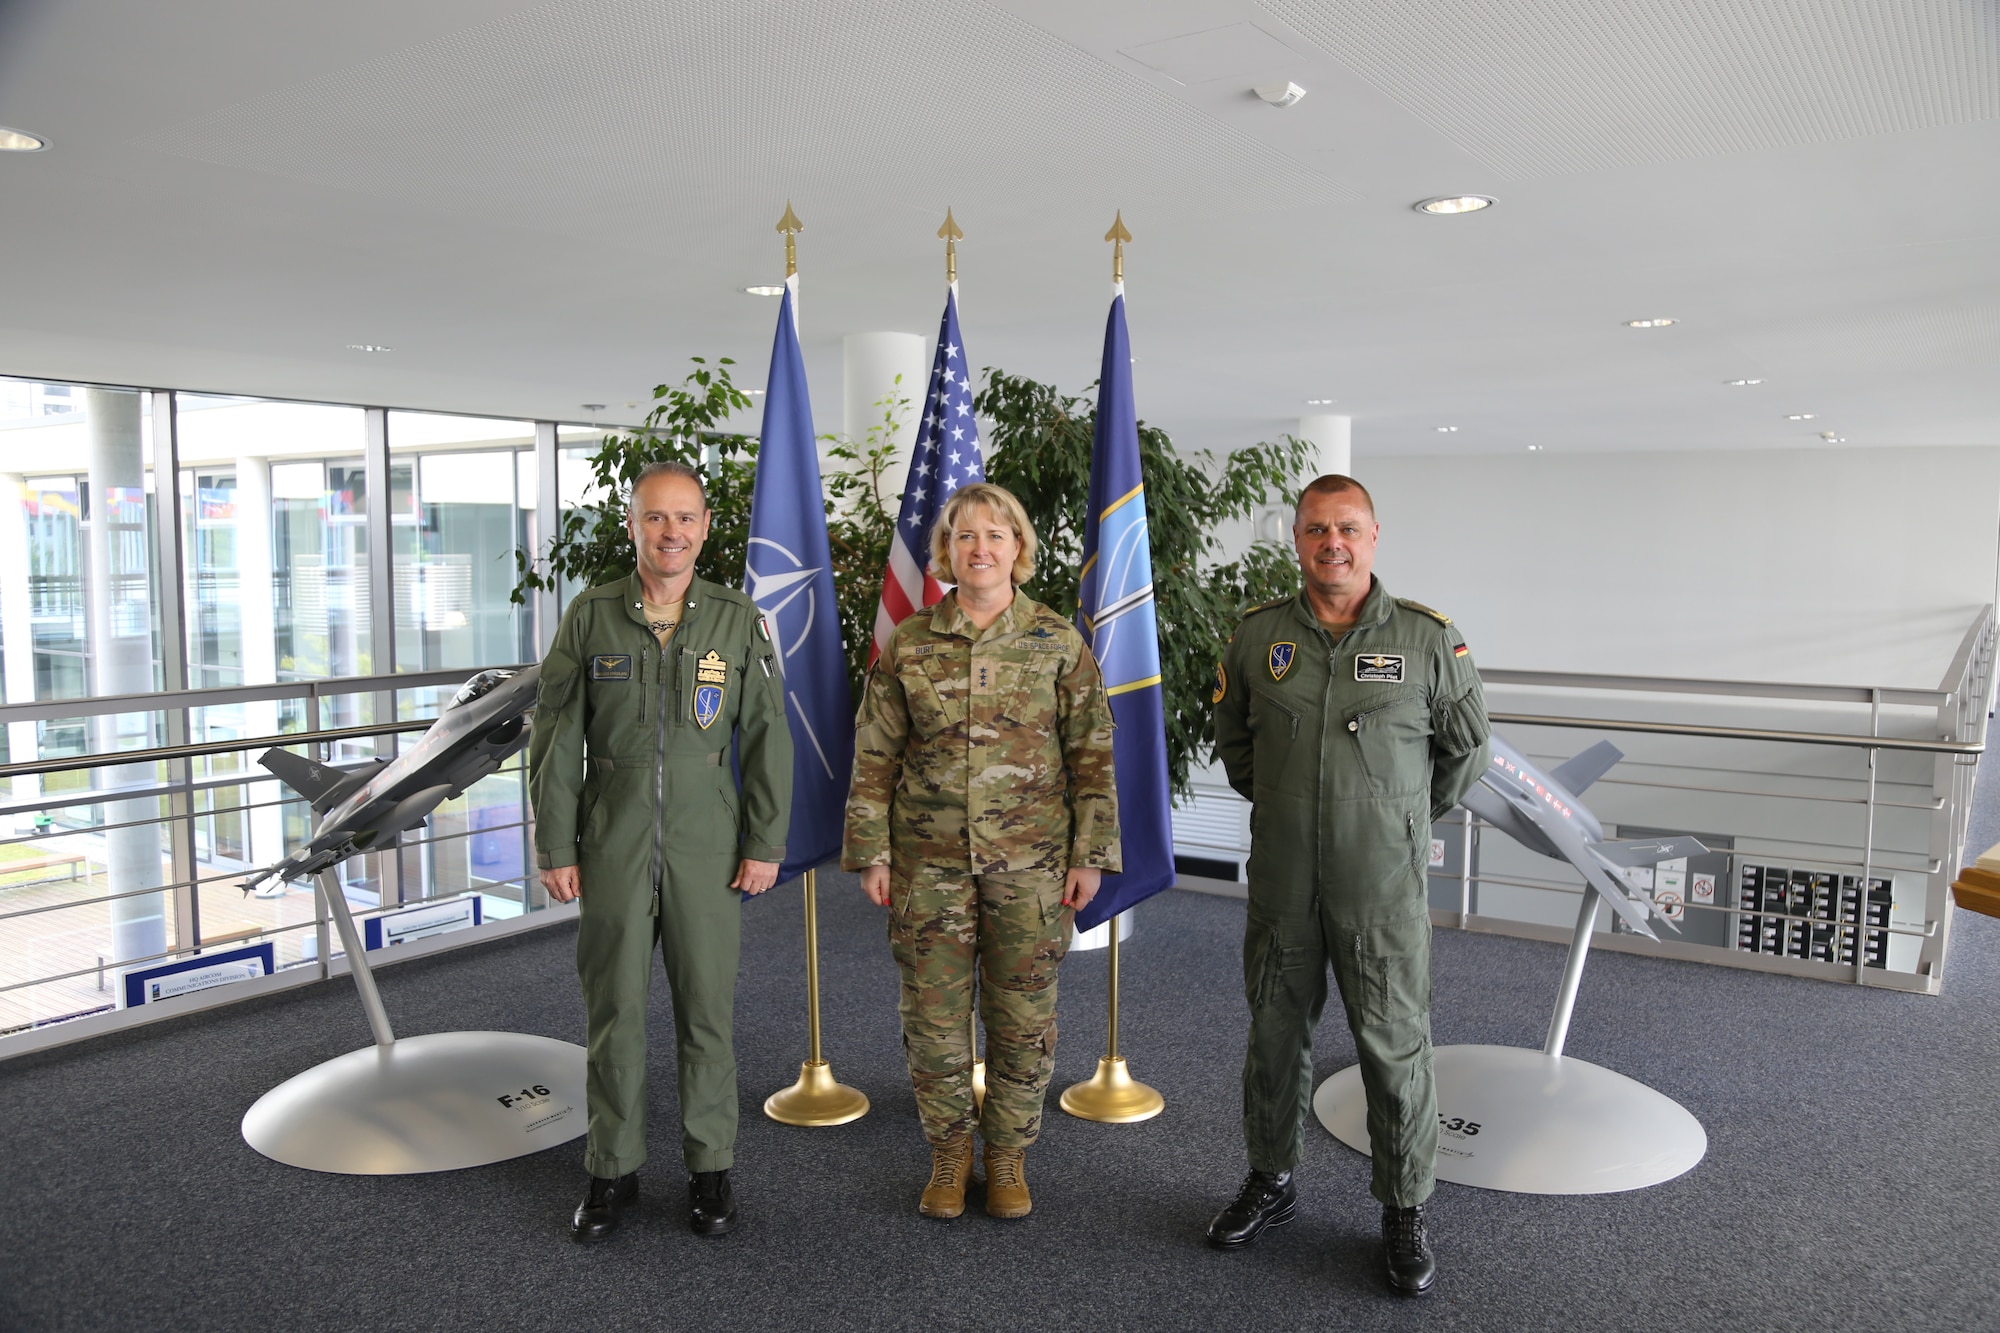 Italian Air Forces Maj. Gen. Gianluca Ercolani, NATO Allied Air Command chief of Staff (left); Lt. Gen. DeAnna Burt (center), Chief Operations Officer for the United States Space Force; and German Air Forces Brig. Gen. Christoph Pliet, NATO Allied Air Command deputy chief of Staff, pose for a picture in NATO Allied Air Command at Ramstein Air Base, Germany, May 22, 2023.
Burt visited the NATO Space Center within NATO Allied Air Command to learn and understand how the U.S. can best integrate and support the Alliance’s space mission.
In December 2019, NATO Heads of State and Government declared space as the Alliance's "fifth domain" of operations, alongside land, sea, air and cyberspace, which provides new space for information sharing, capability building, and multilateral cooperation alongside our NATO Allies and Partners.